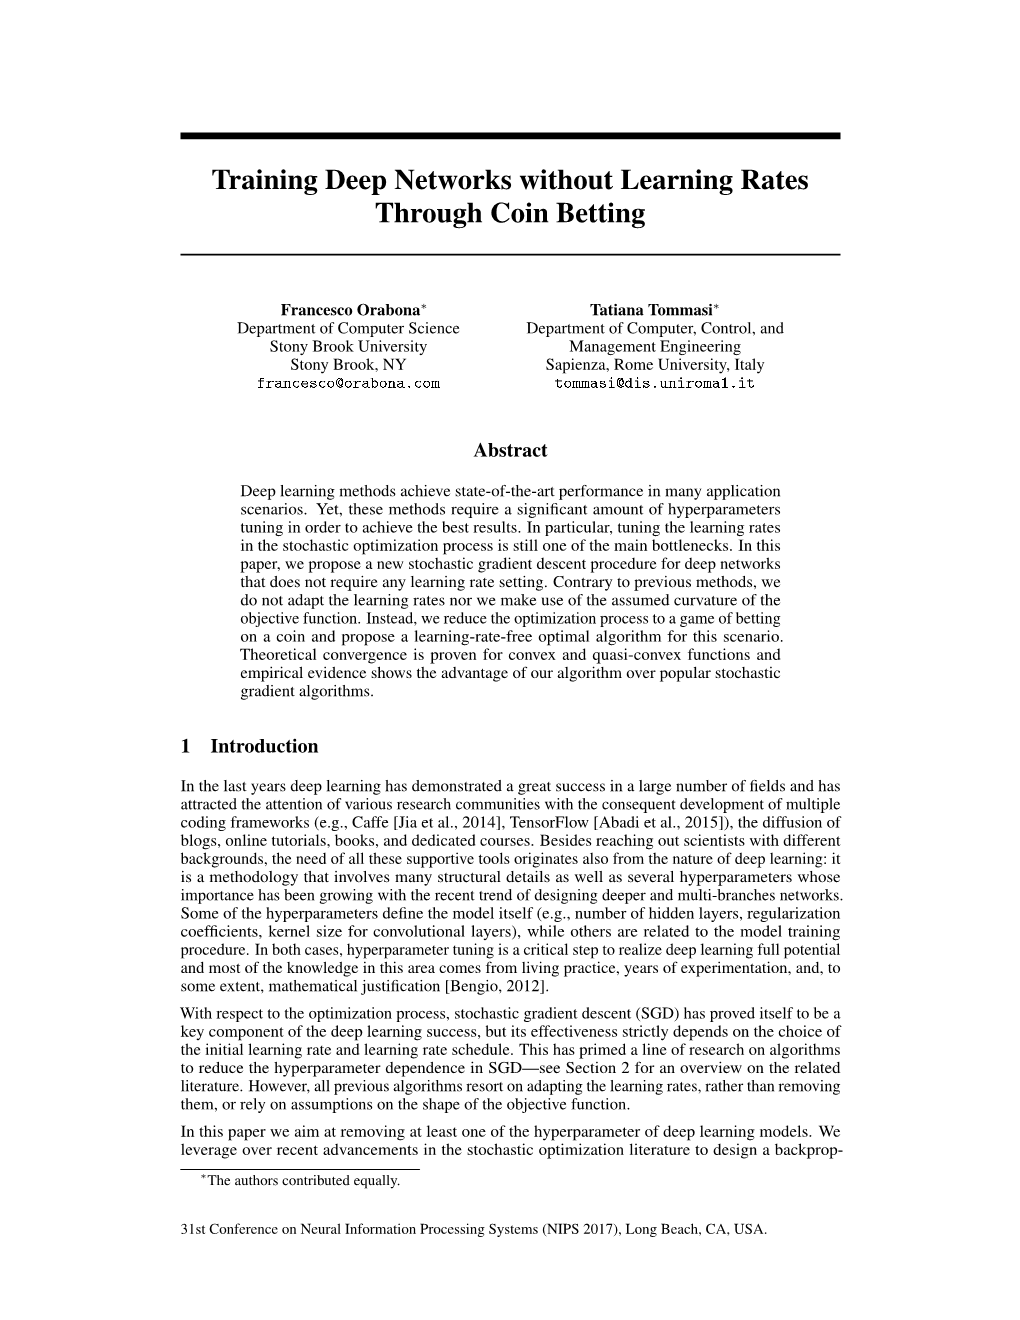 Training Deep Networks Without Learning Rates Through Coin Betting